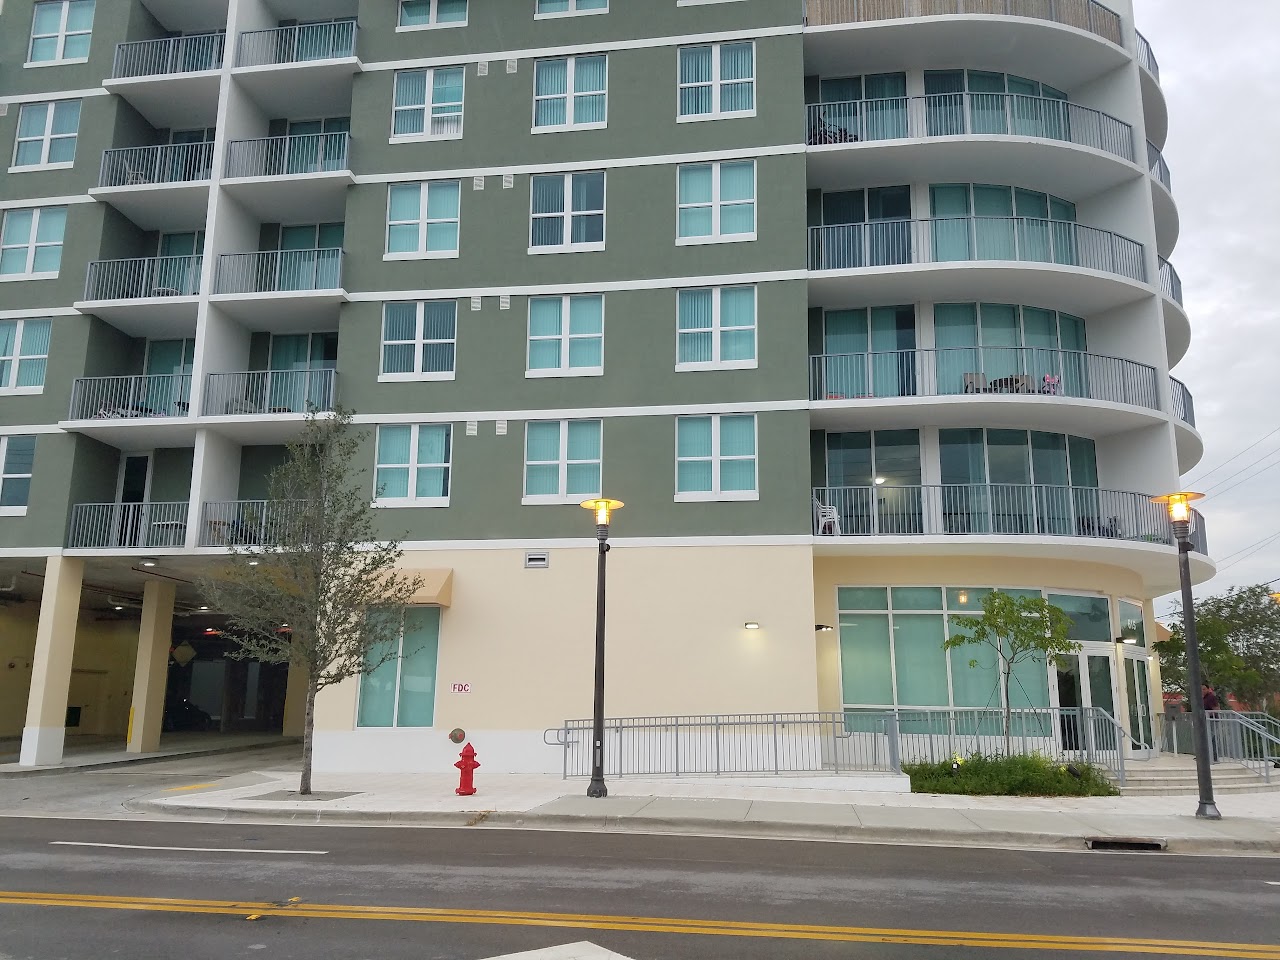 Photo of WISDOM VILLAGE CROSSING. Affordable housing located at 615 N ANDREWS AVENUE FT LAUDERDALE, FL 33311